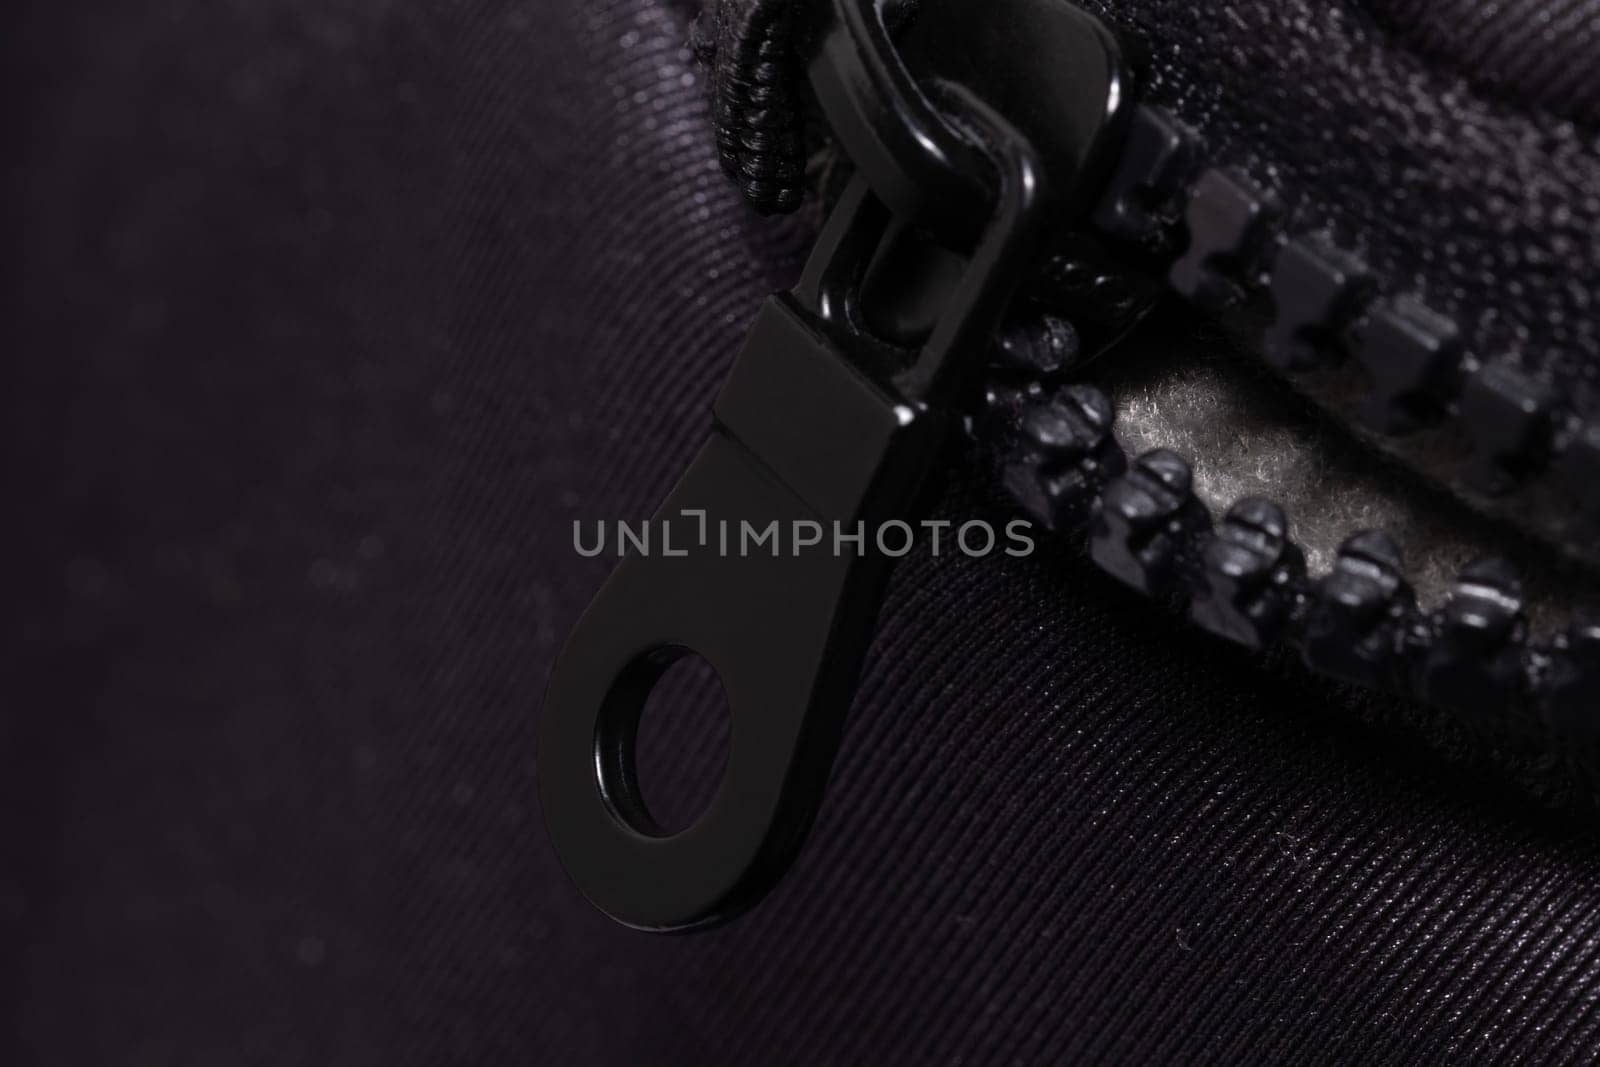 This image captures the detailed texture of a black zipper partially closed on a dark fabric, highlighting the interlocking teeth and the metal pull.